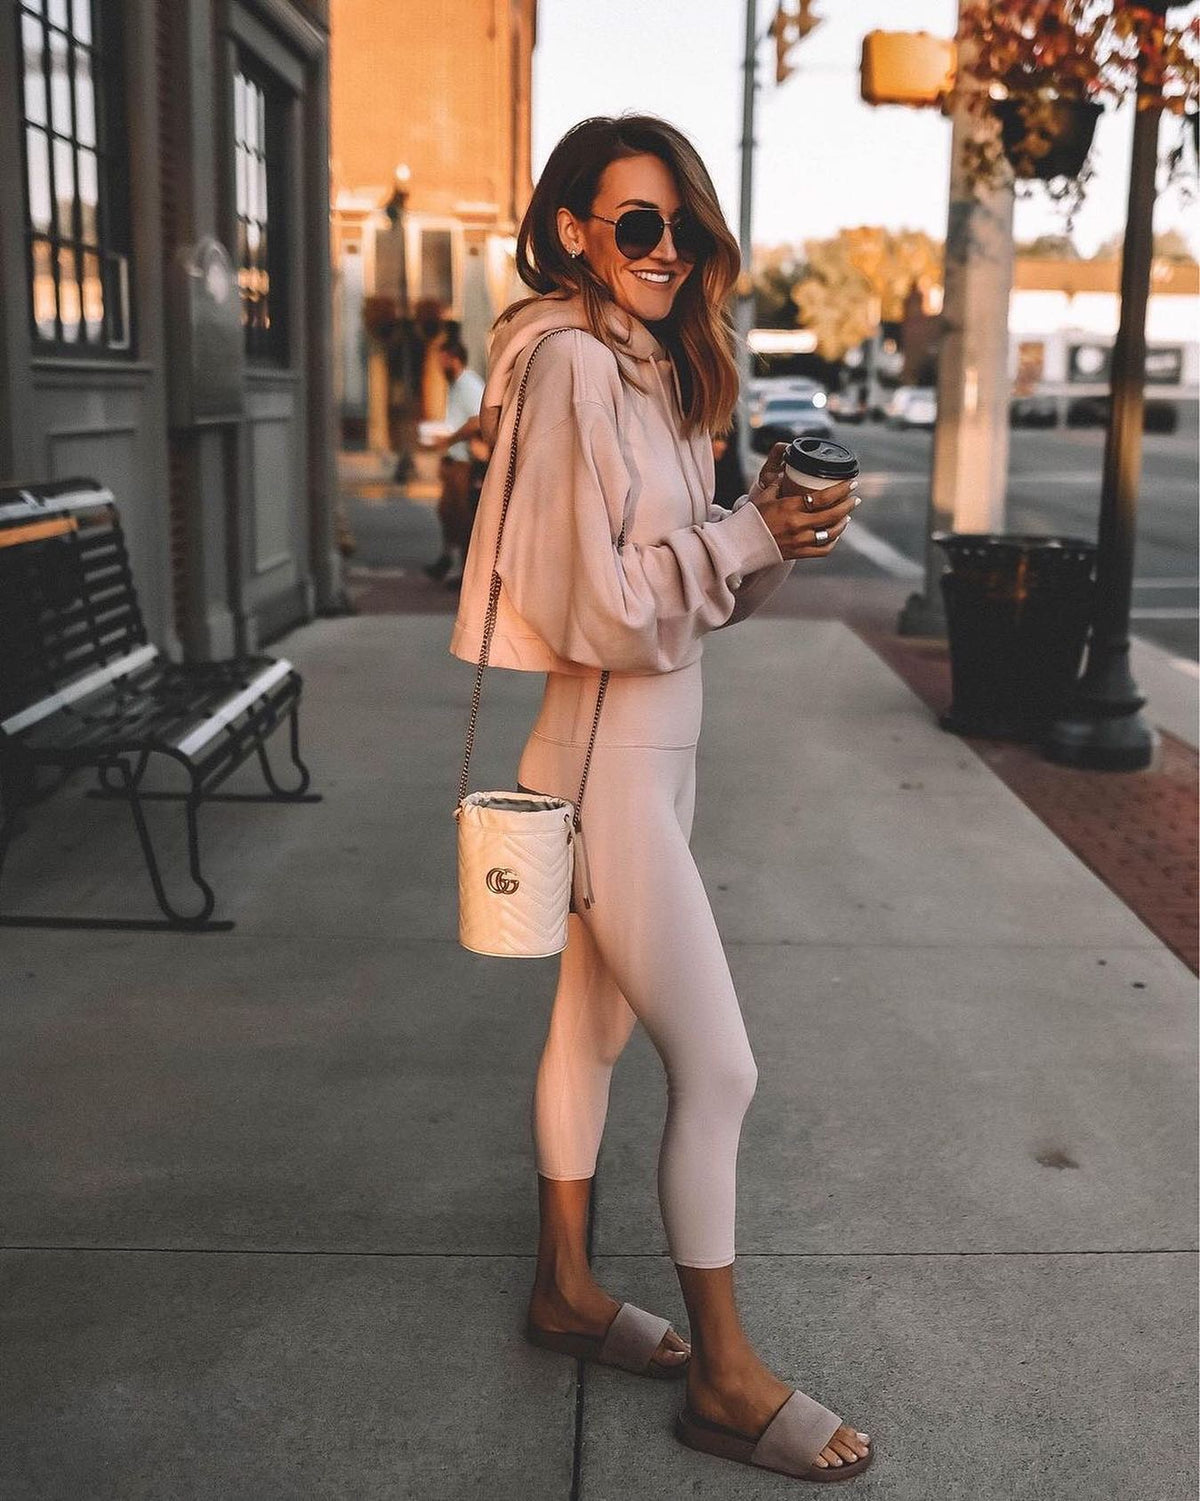 @karinastylediaries wearing a light pink capri legging with matched cropped sweatshirt with slides, a designer purse, and sunglasses while grabbing a coffee. 